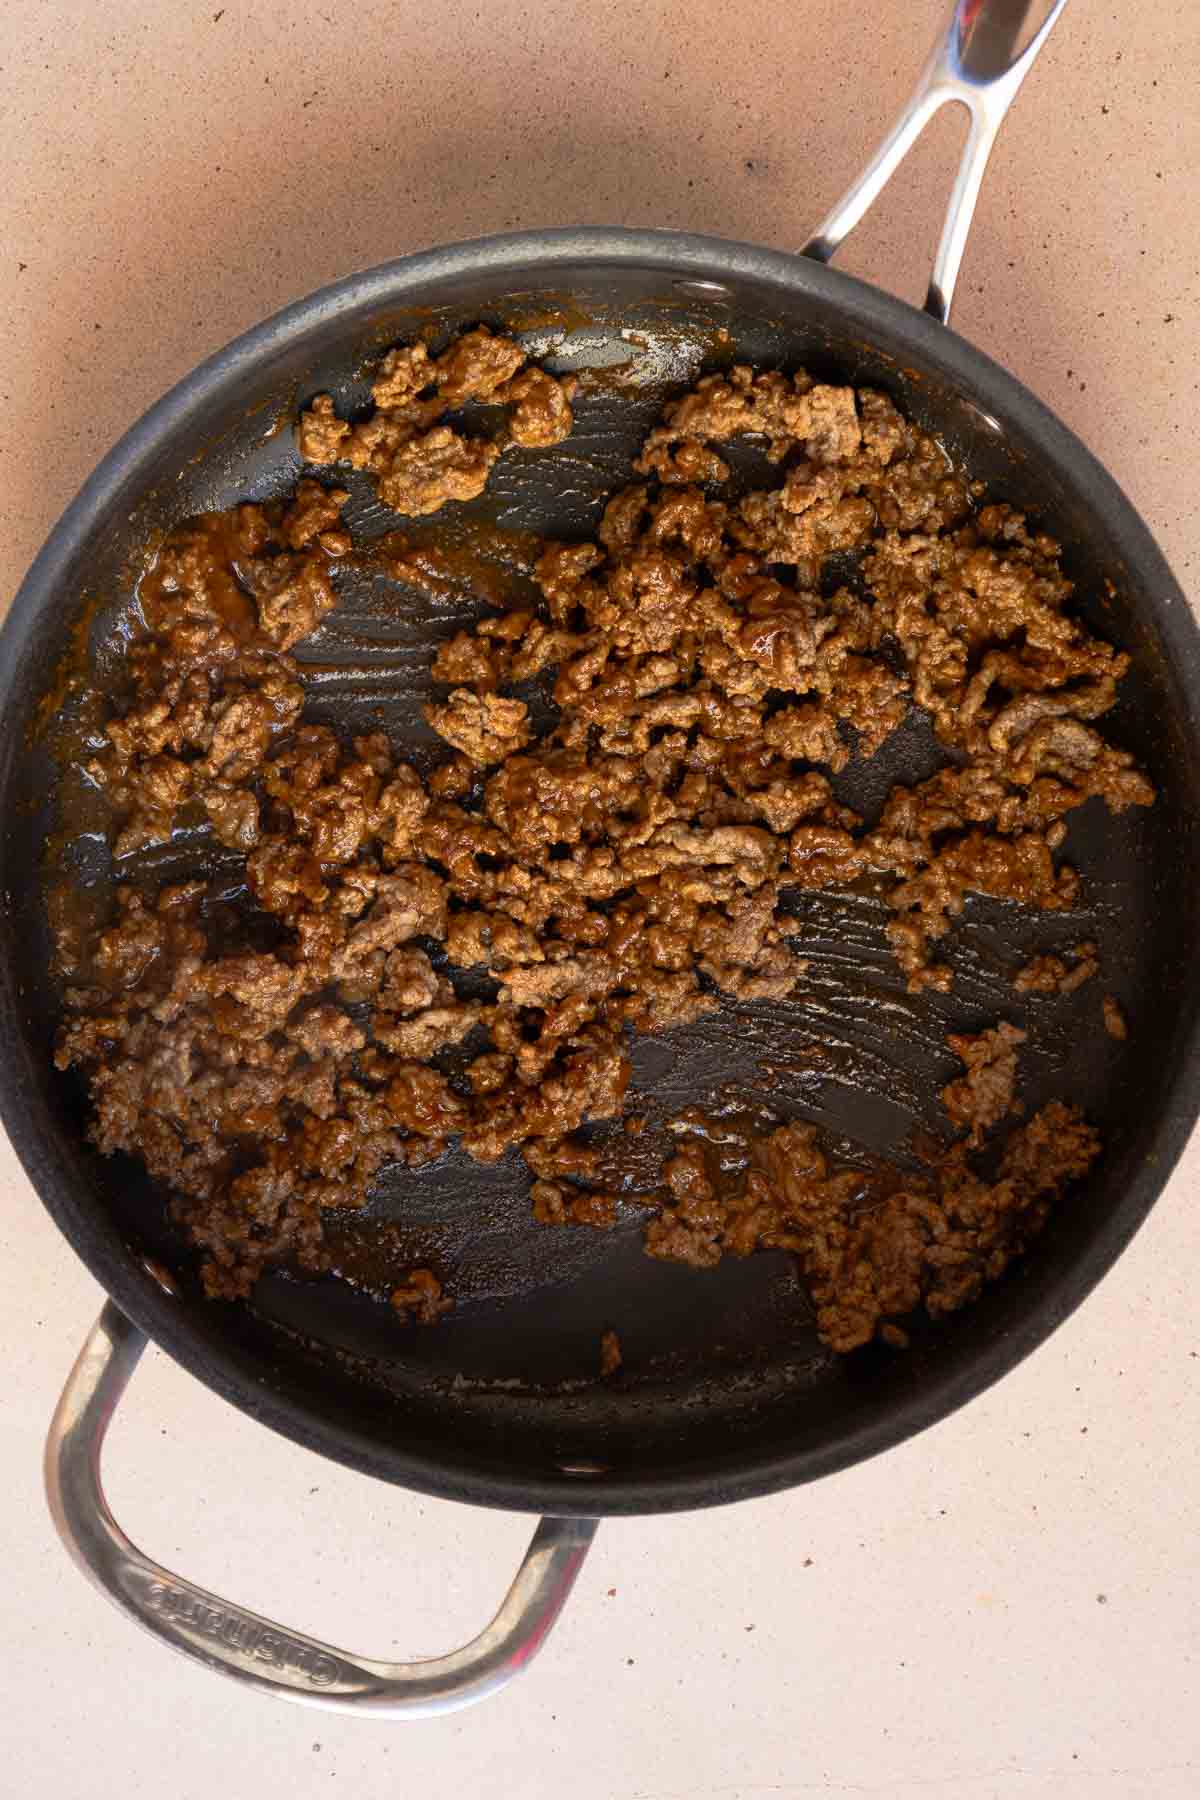 The ground beef is simmered in the taco seasoning and water until thickened.